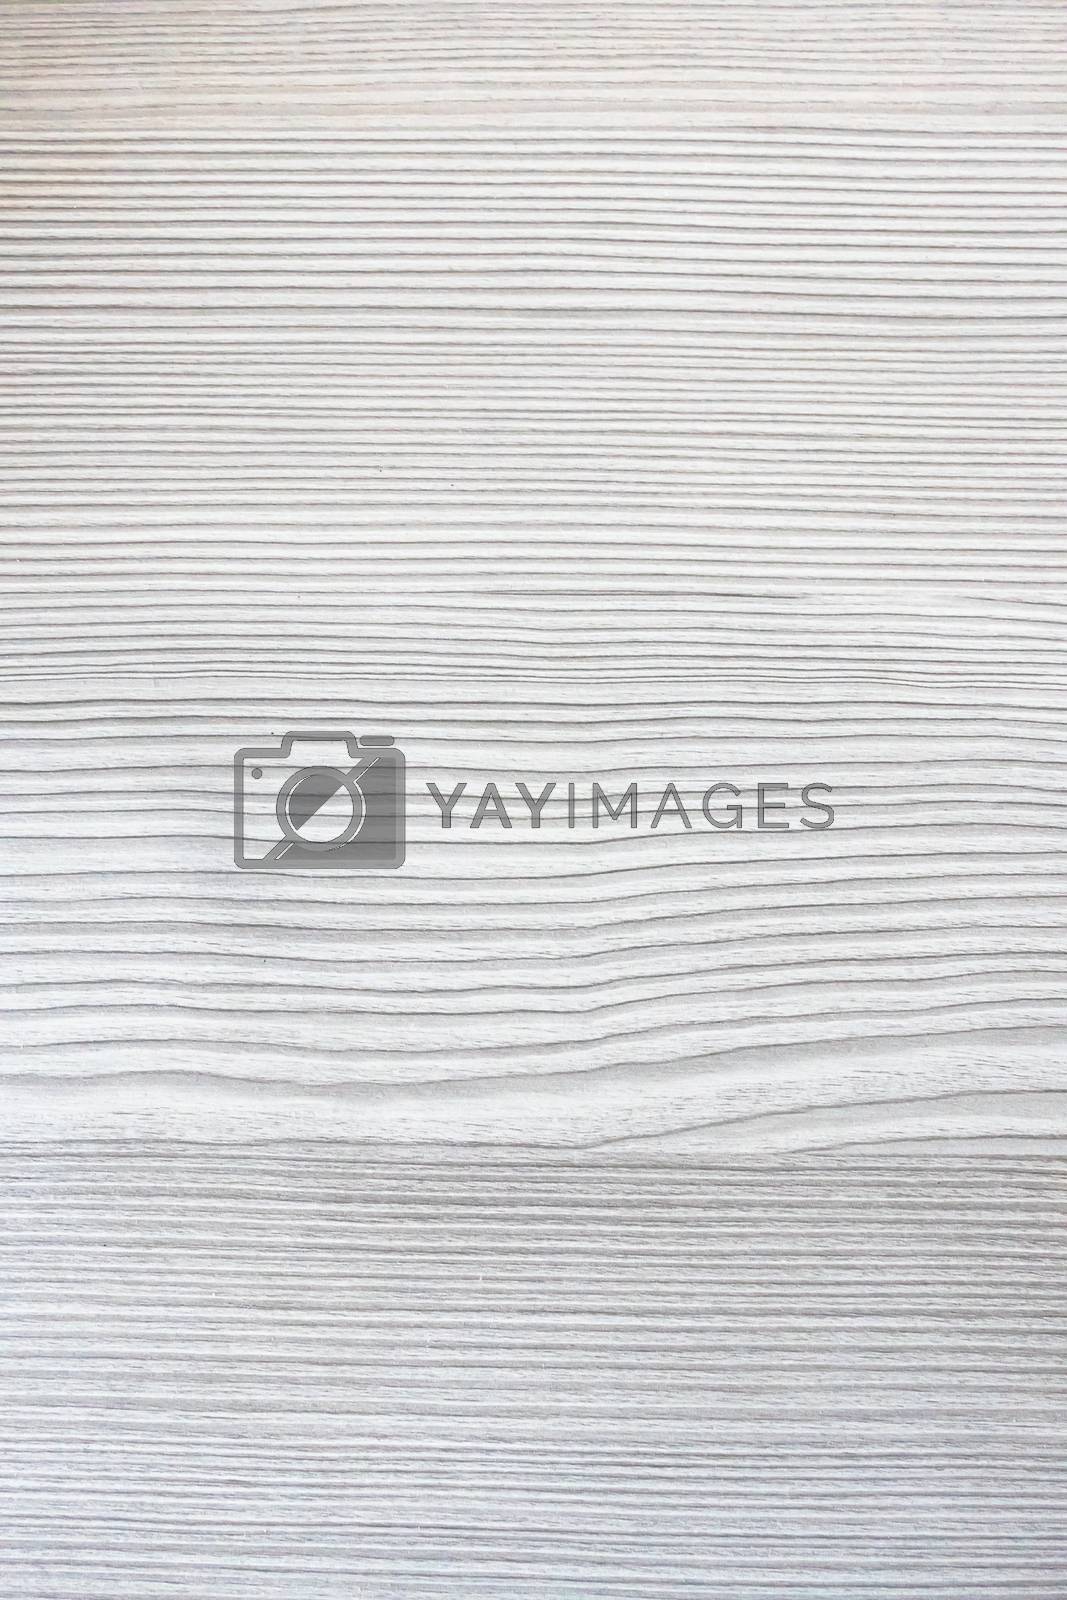 Royalty free image of White wood background by germanopoli